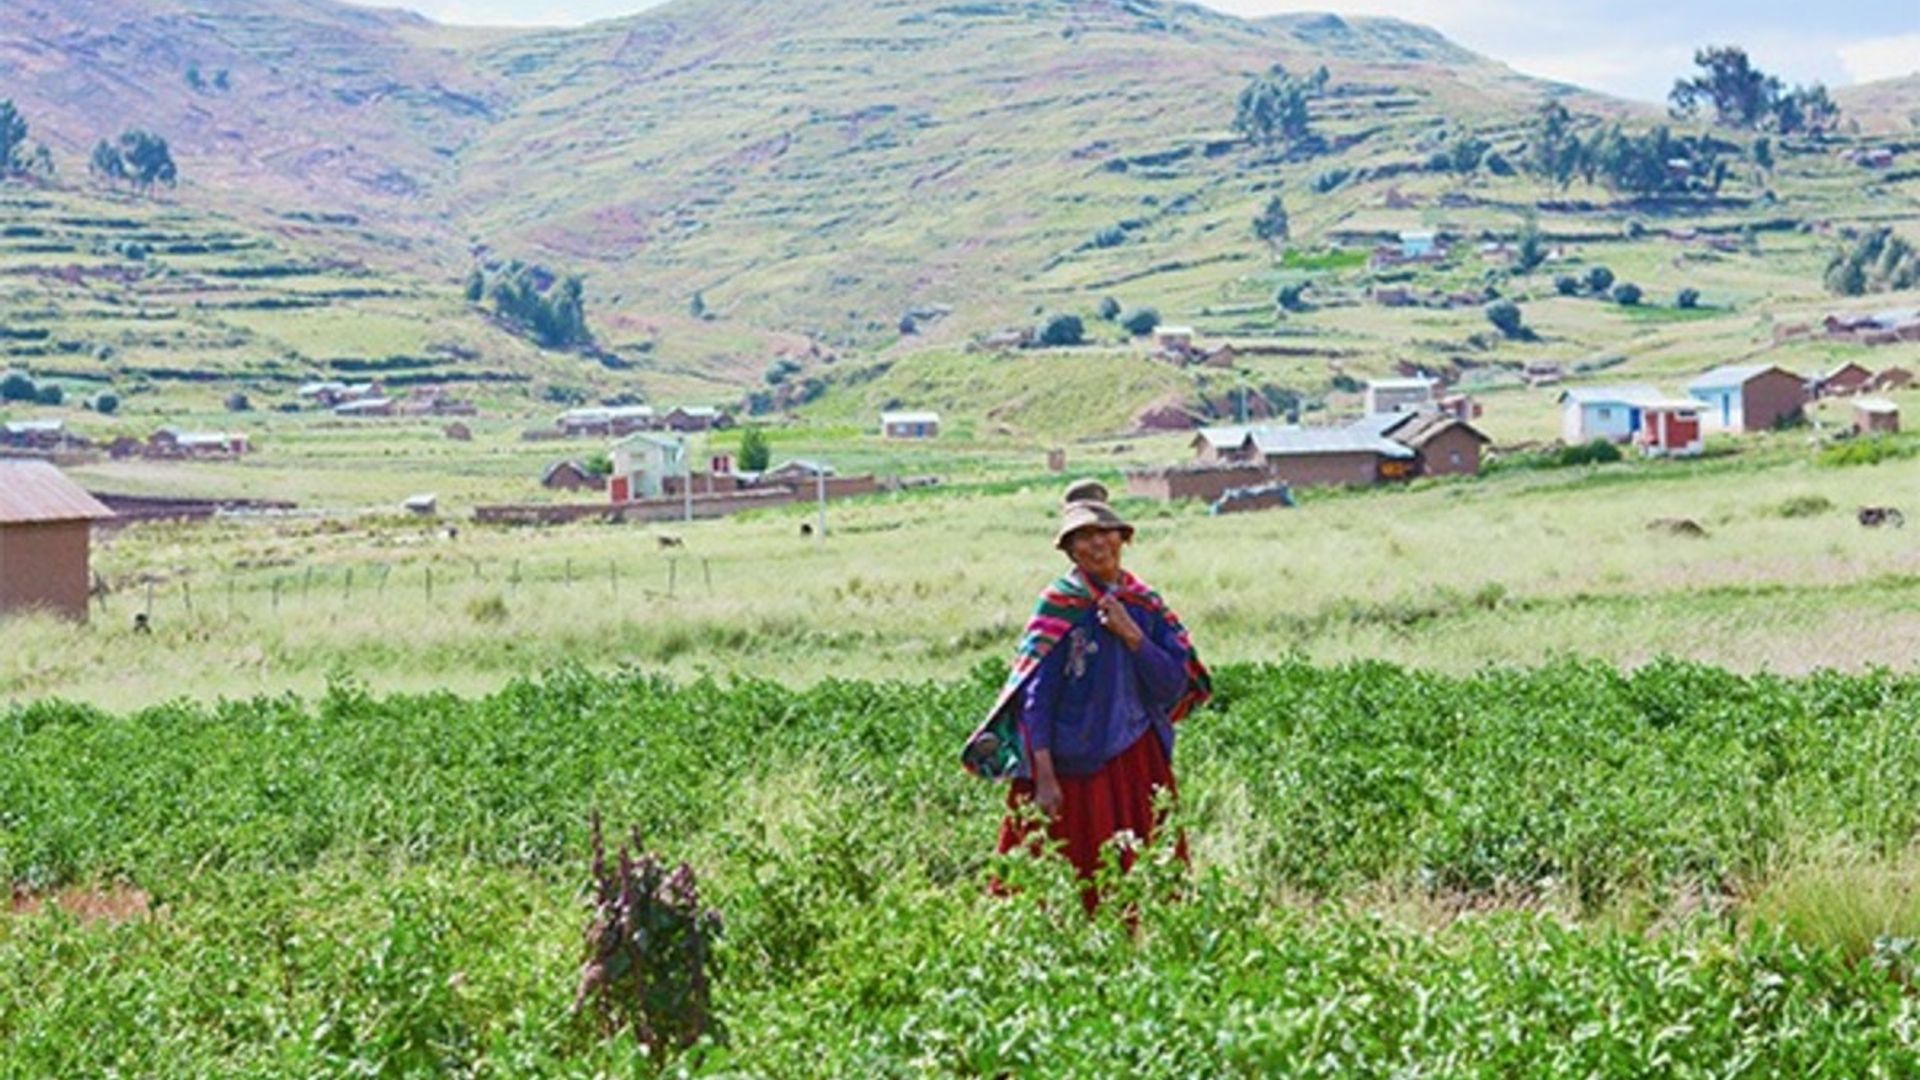 Image of a Peruvian producer